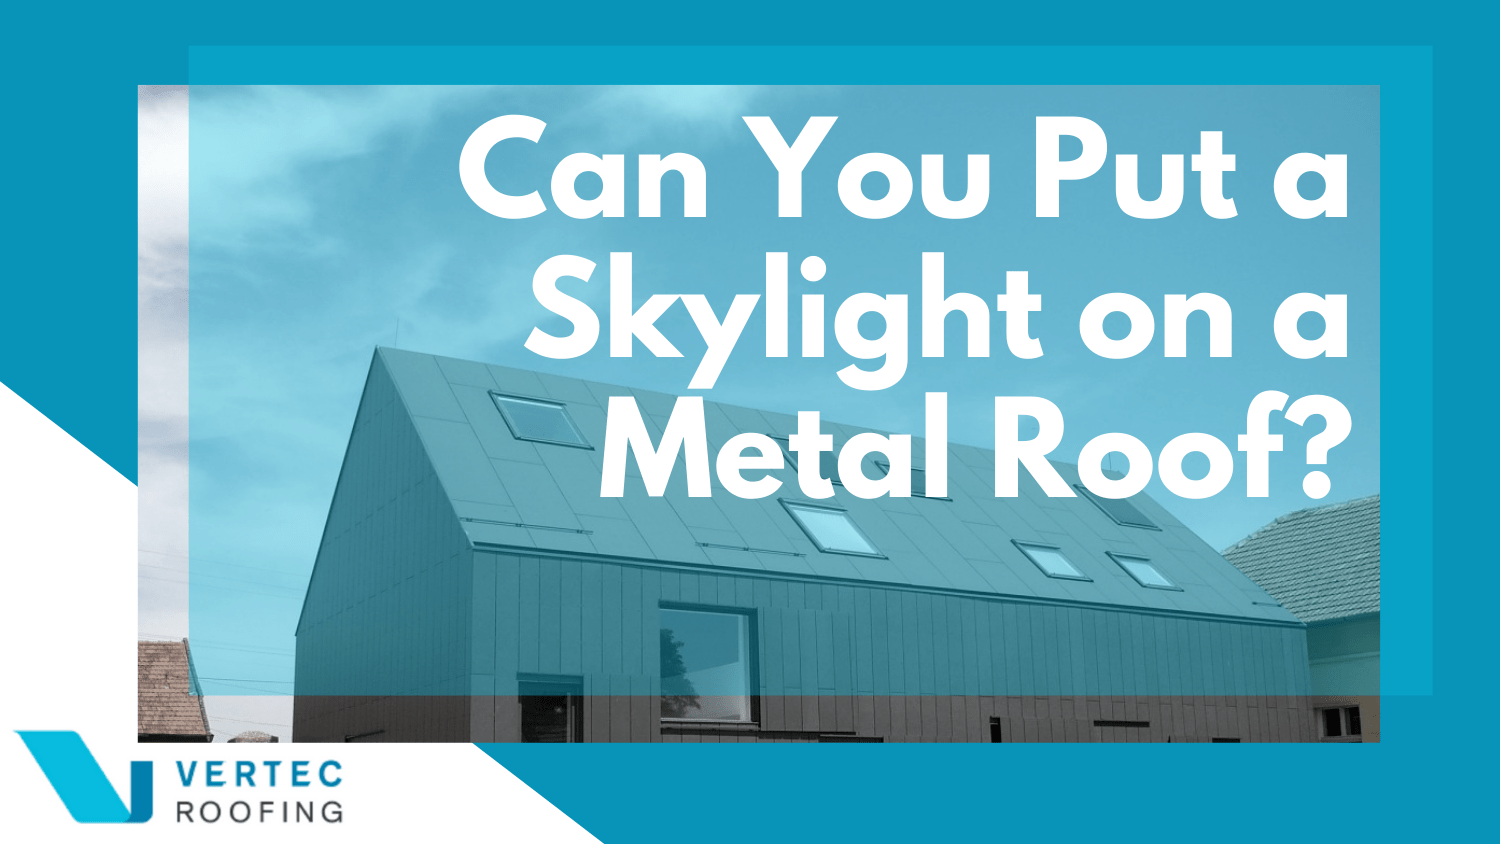 Can You Put a Skylight on a Metal Roof? | Vertec Roofing